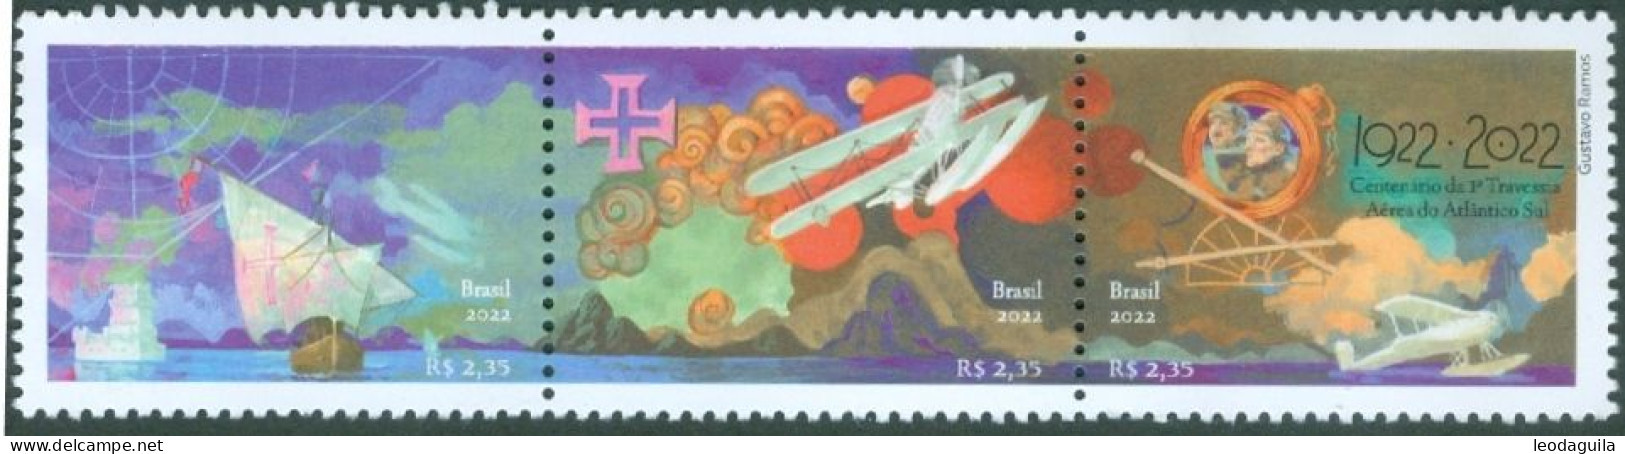 BRAZIL &  PORTUGAL - FIRST CROSSING OF THE SOUTH ATLANTIC BY AIRPLANE- CENTENARY - TRIPTICS - BOTH ISSUES 2022 - MINT - Unused Stamps